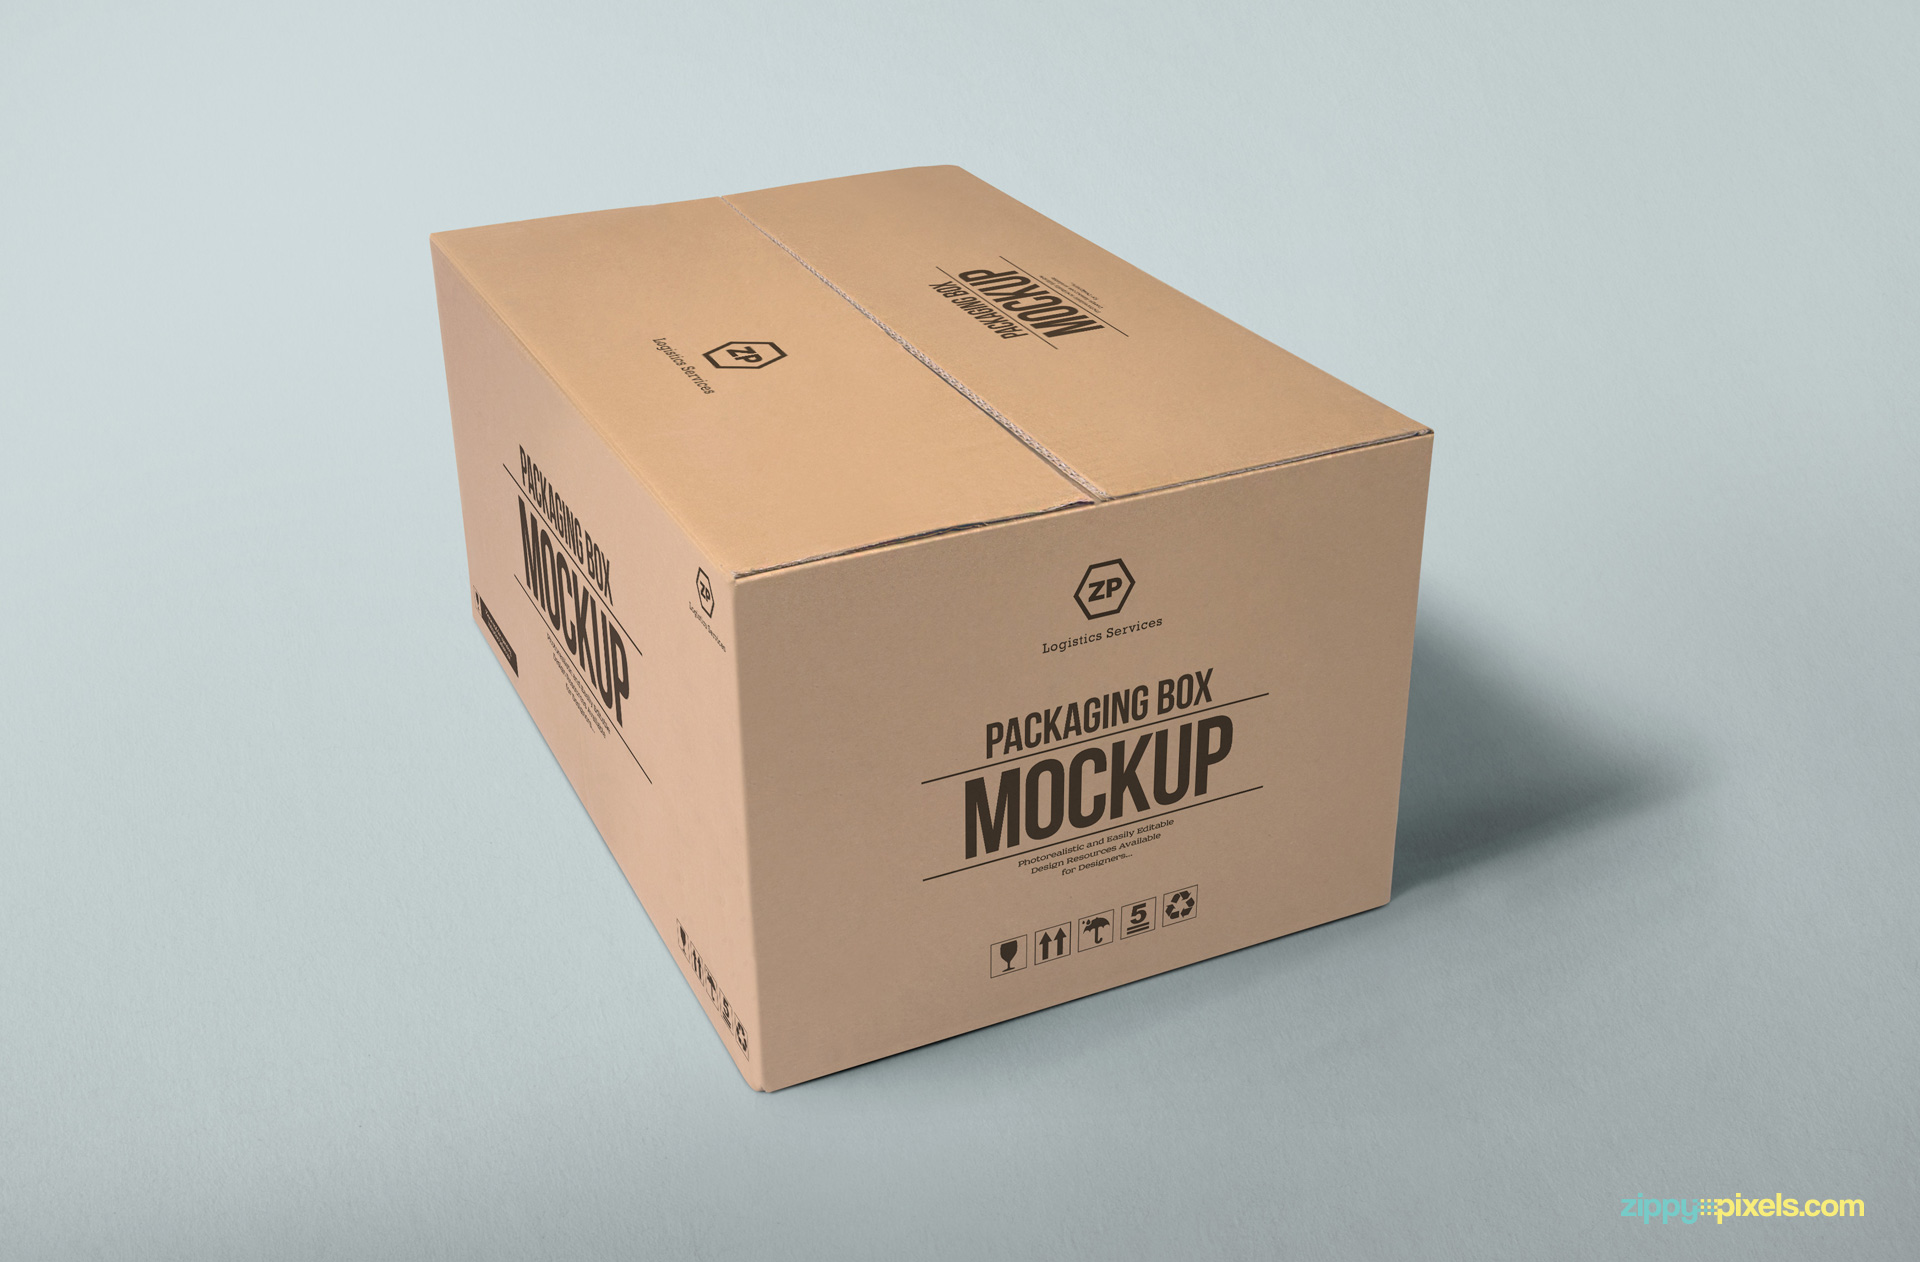 Awesome way to showcase your packaging designs